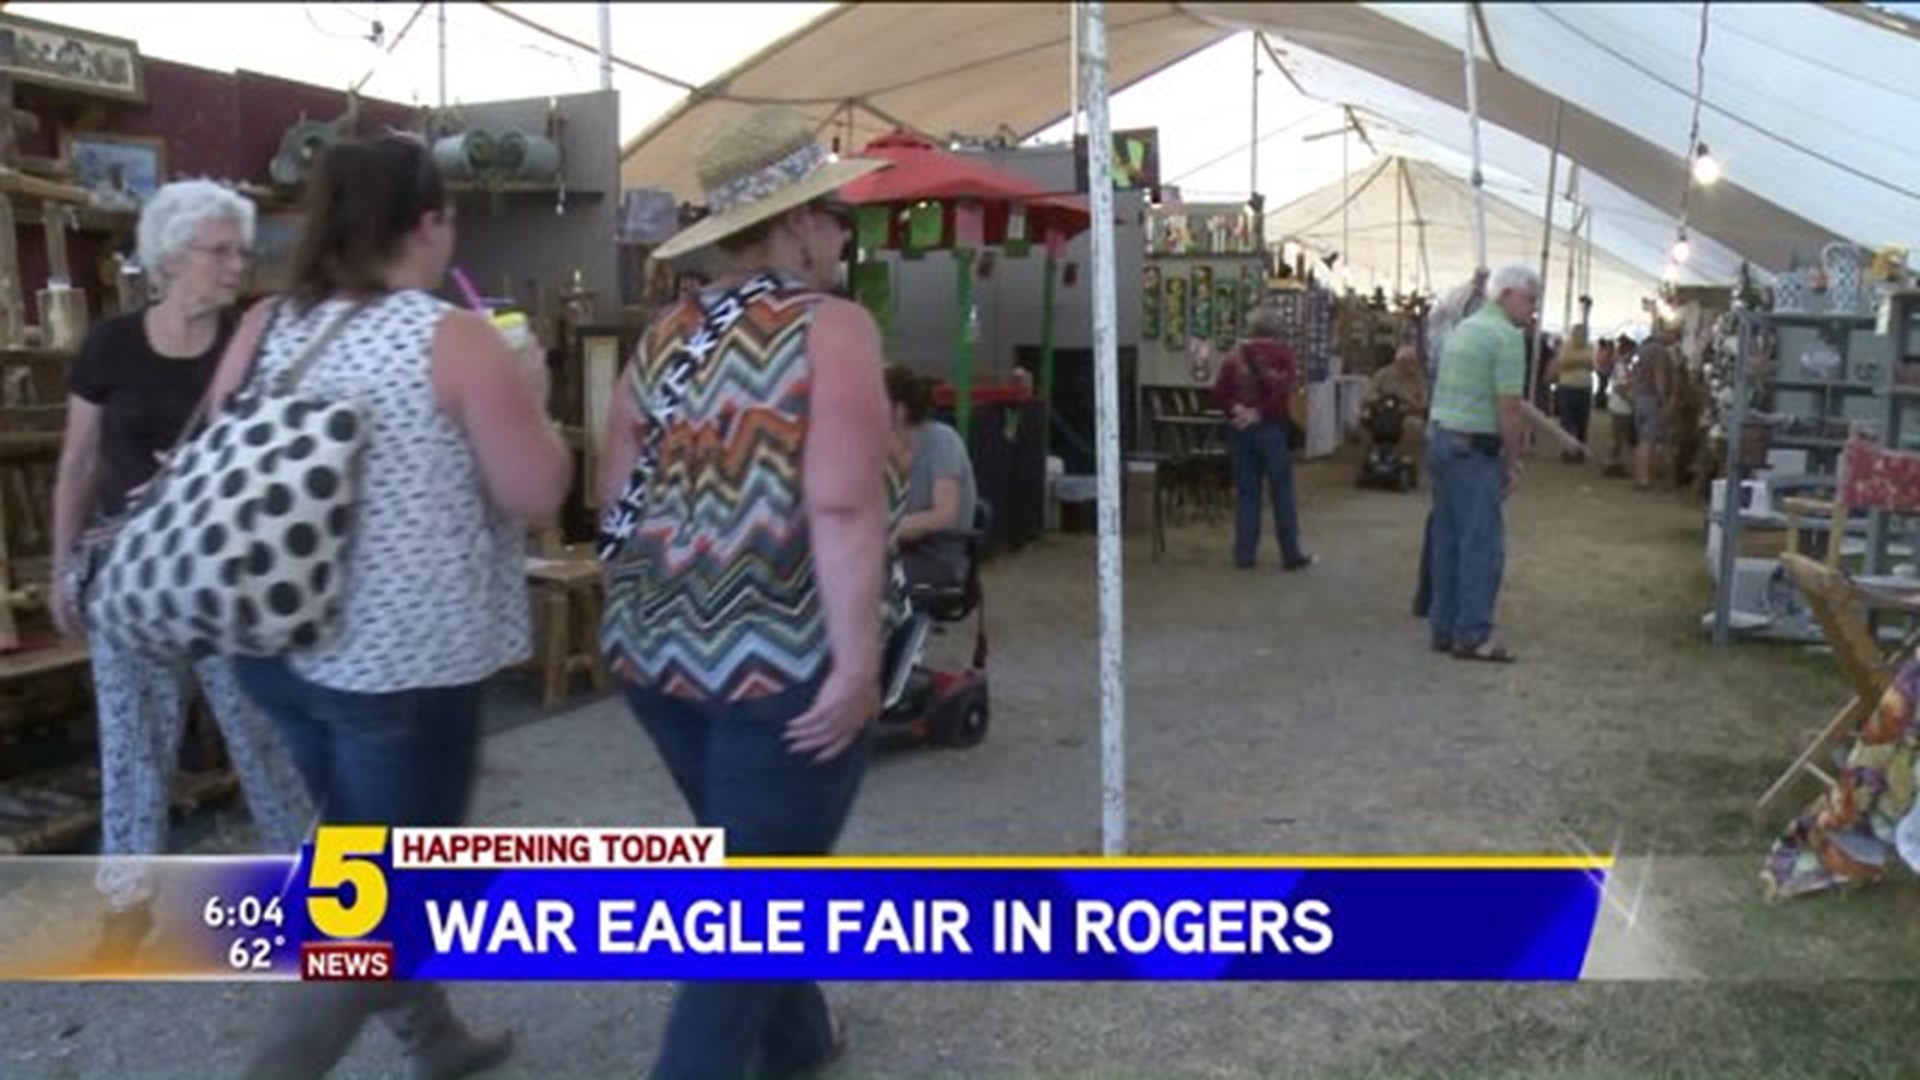 Thousands Expected To Attend War Eagle Fair In Rogers